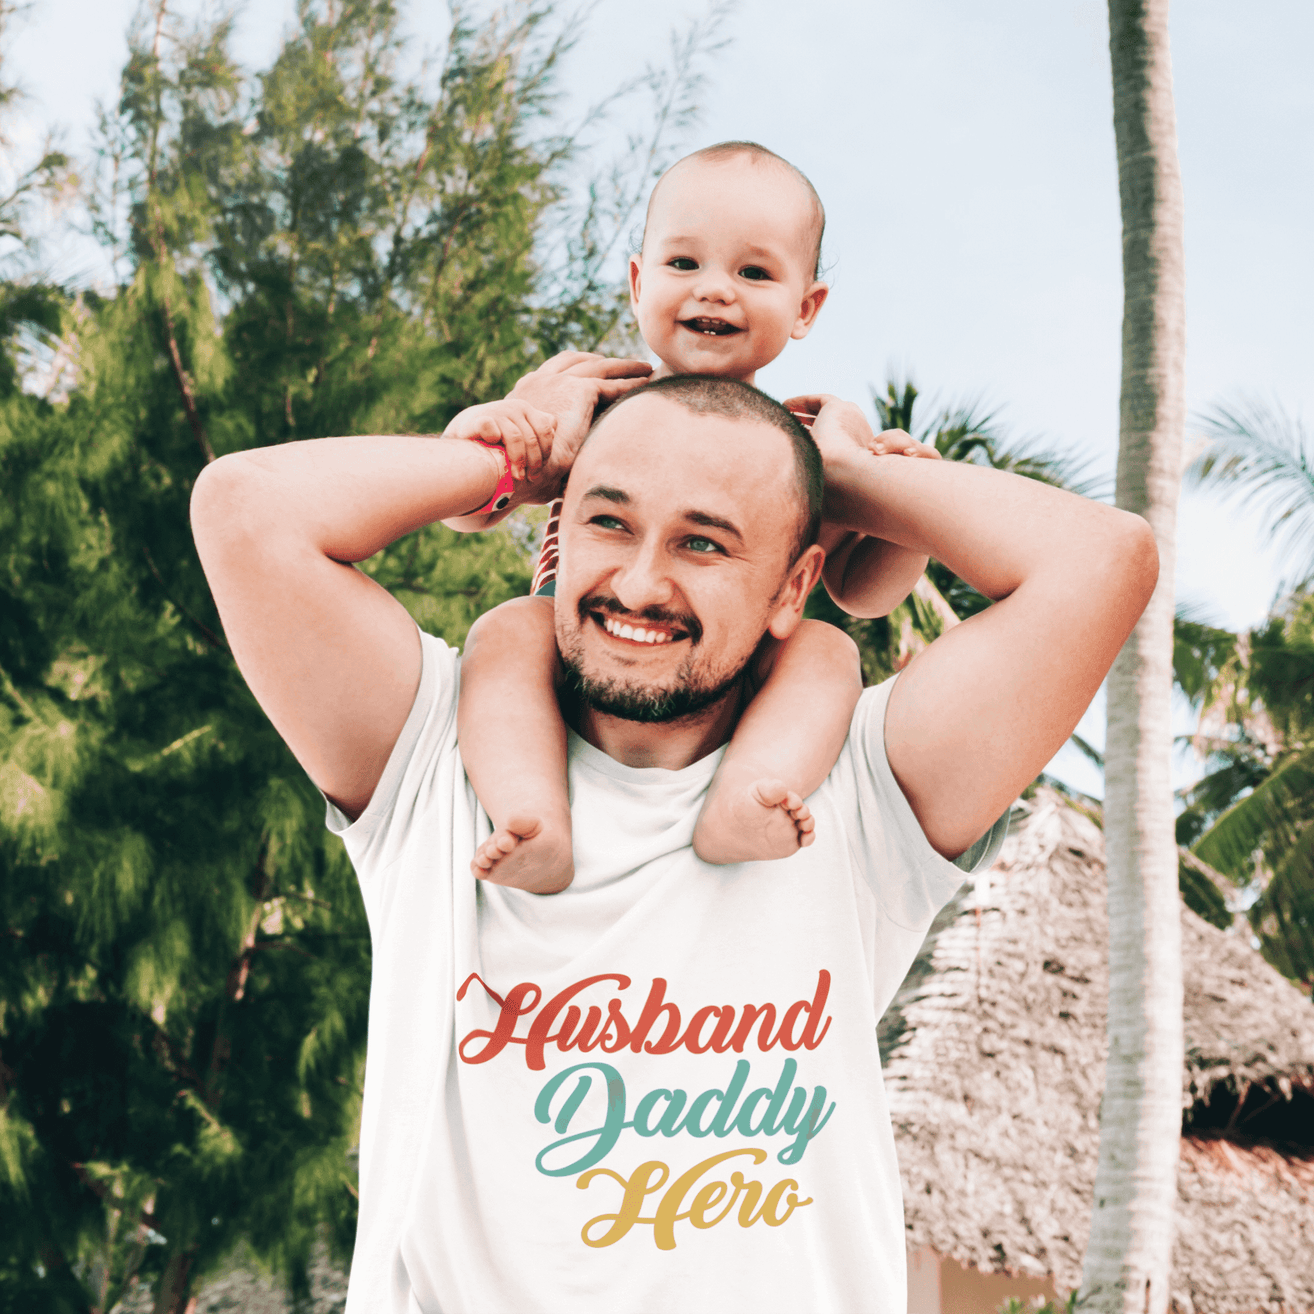 "Husband, Daddy, Hero"  Day Special  Men's Cotton T-Shirt